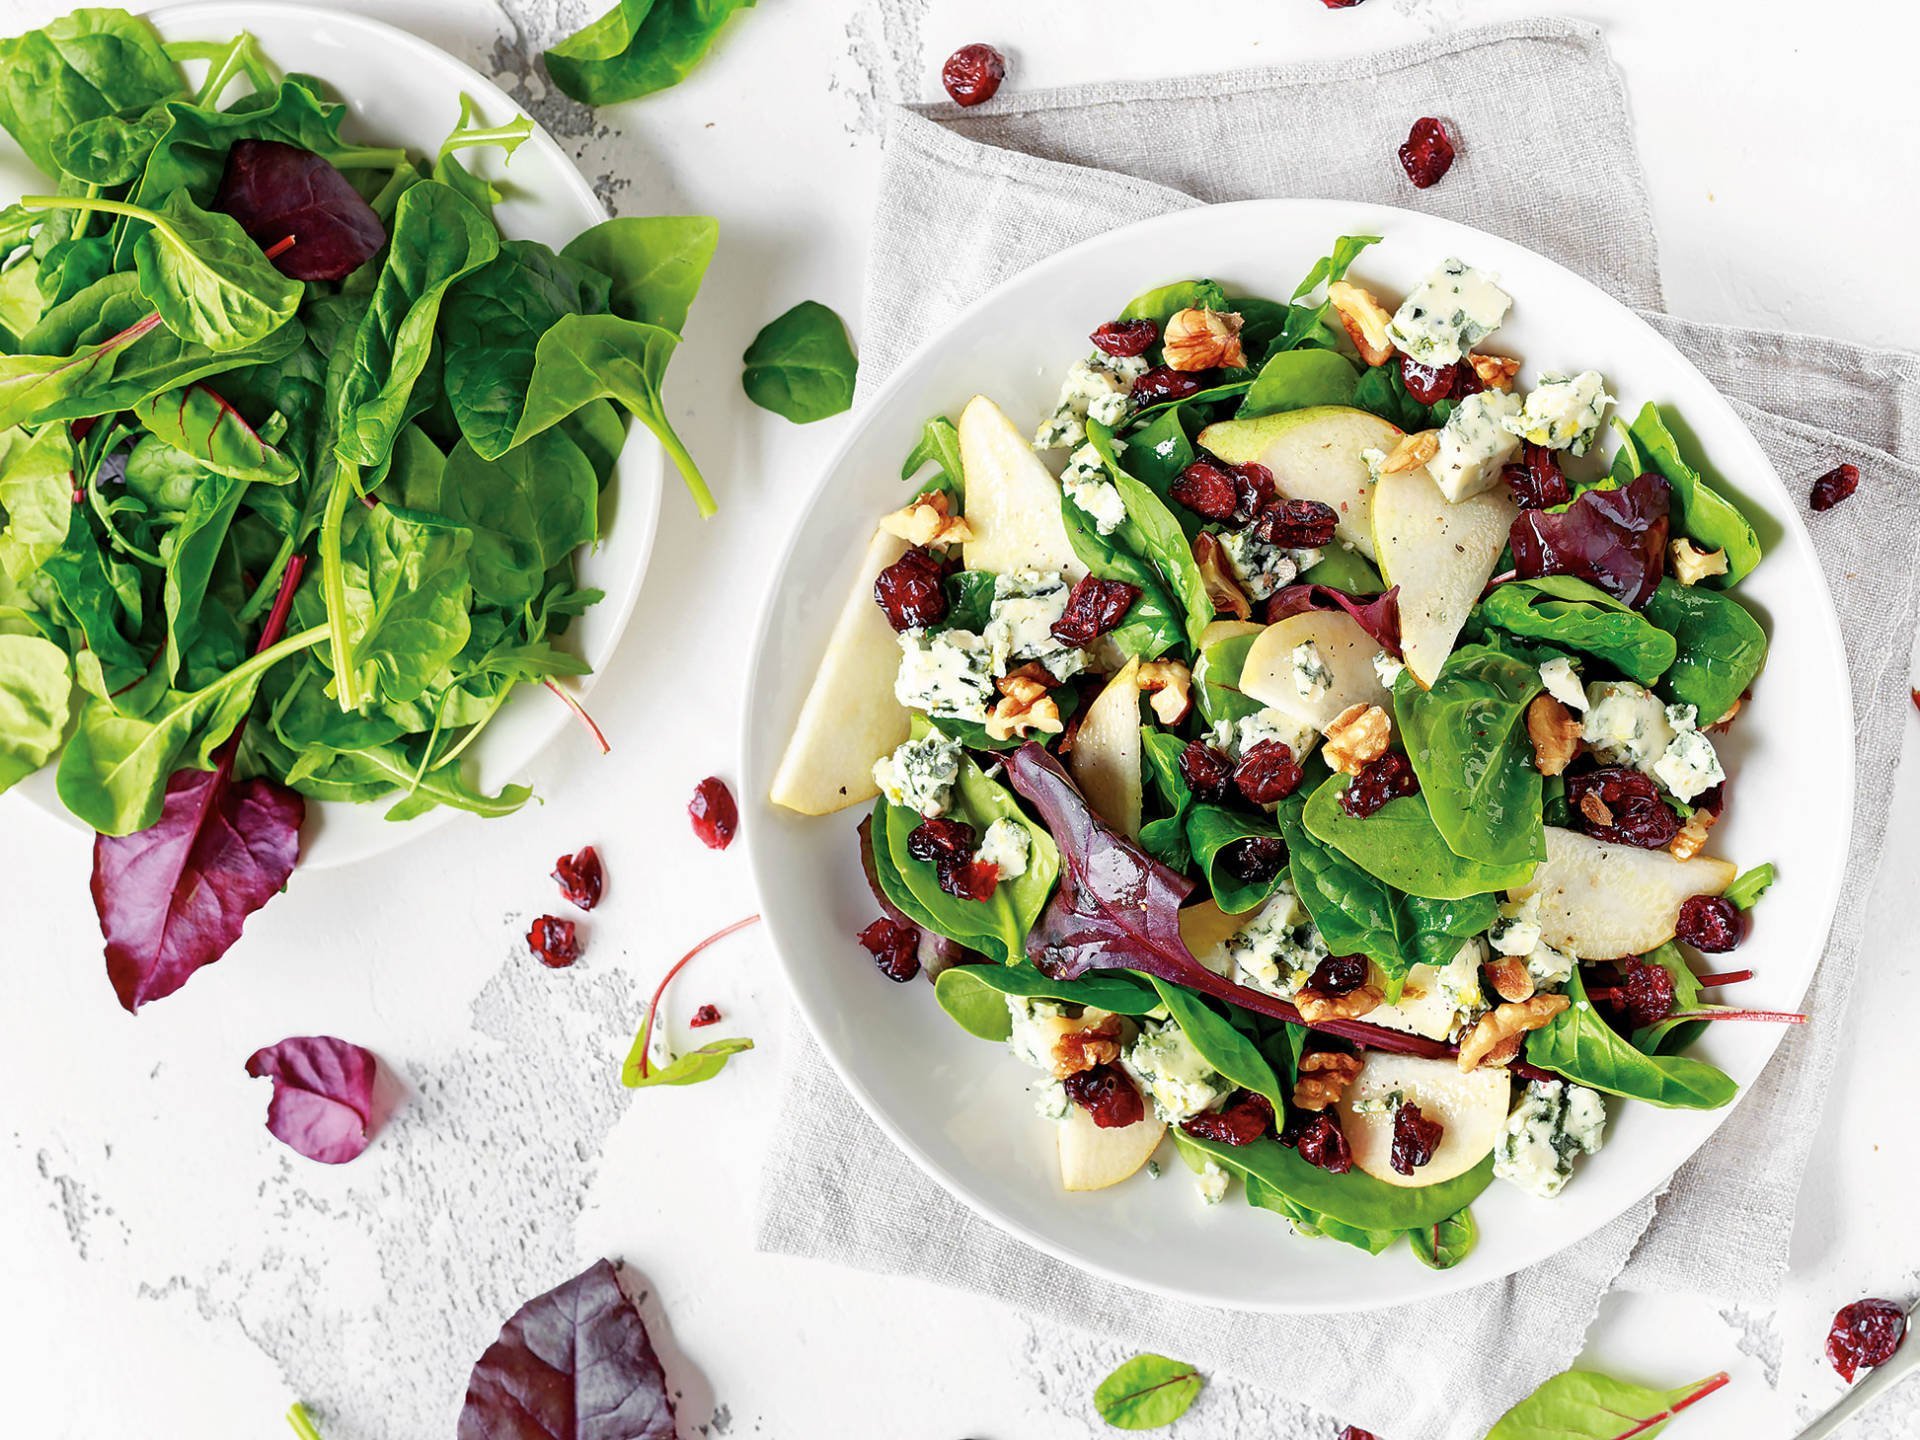 Fresh Pears, Blue Cheese Salad With Vegetable Green Mix, Walnuts, Cranberry. Healthy Food